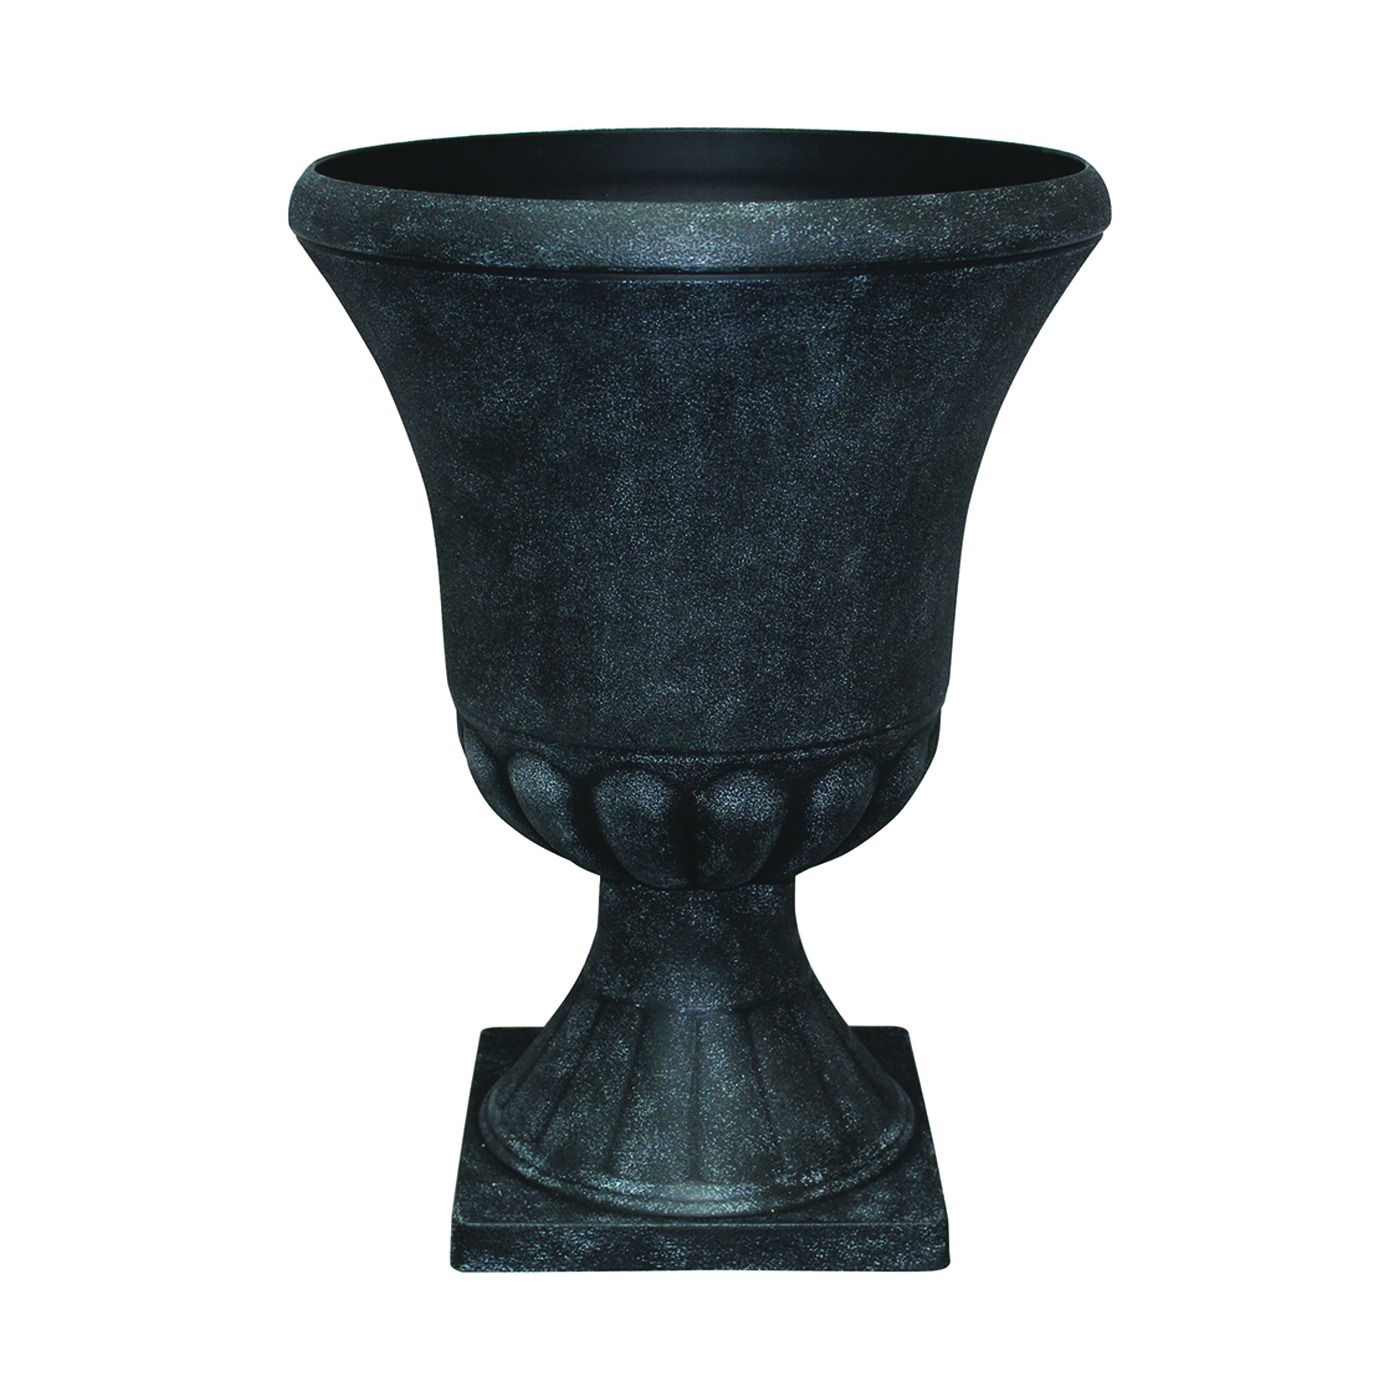 EB-029816 Winston Urn, 21 in H, 16 in W, 16 in D, Resin/Stone Composite, Weathered Black